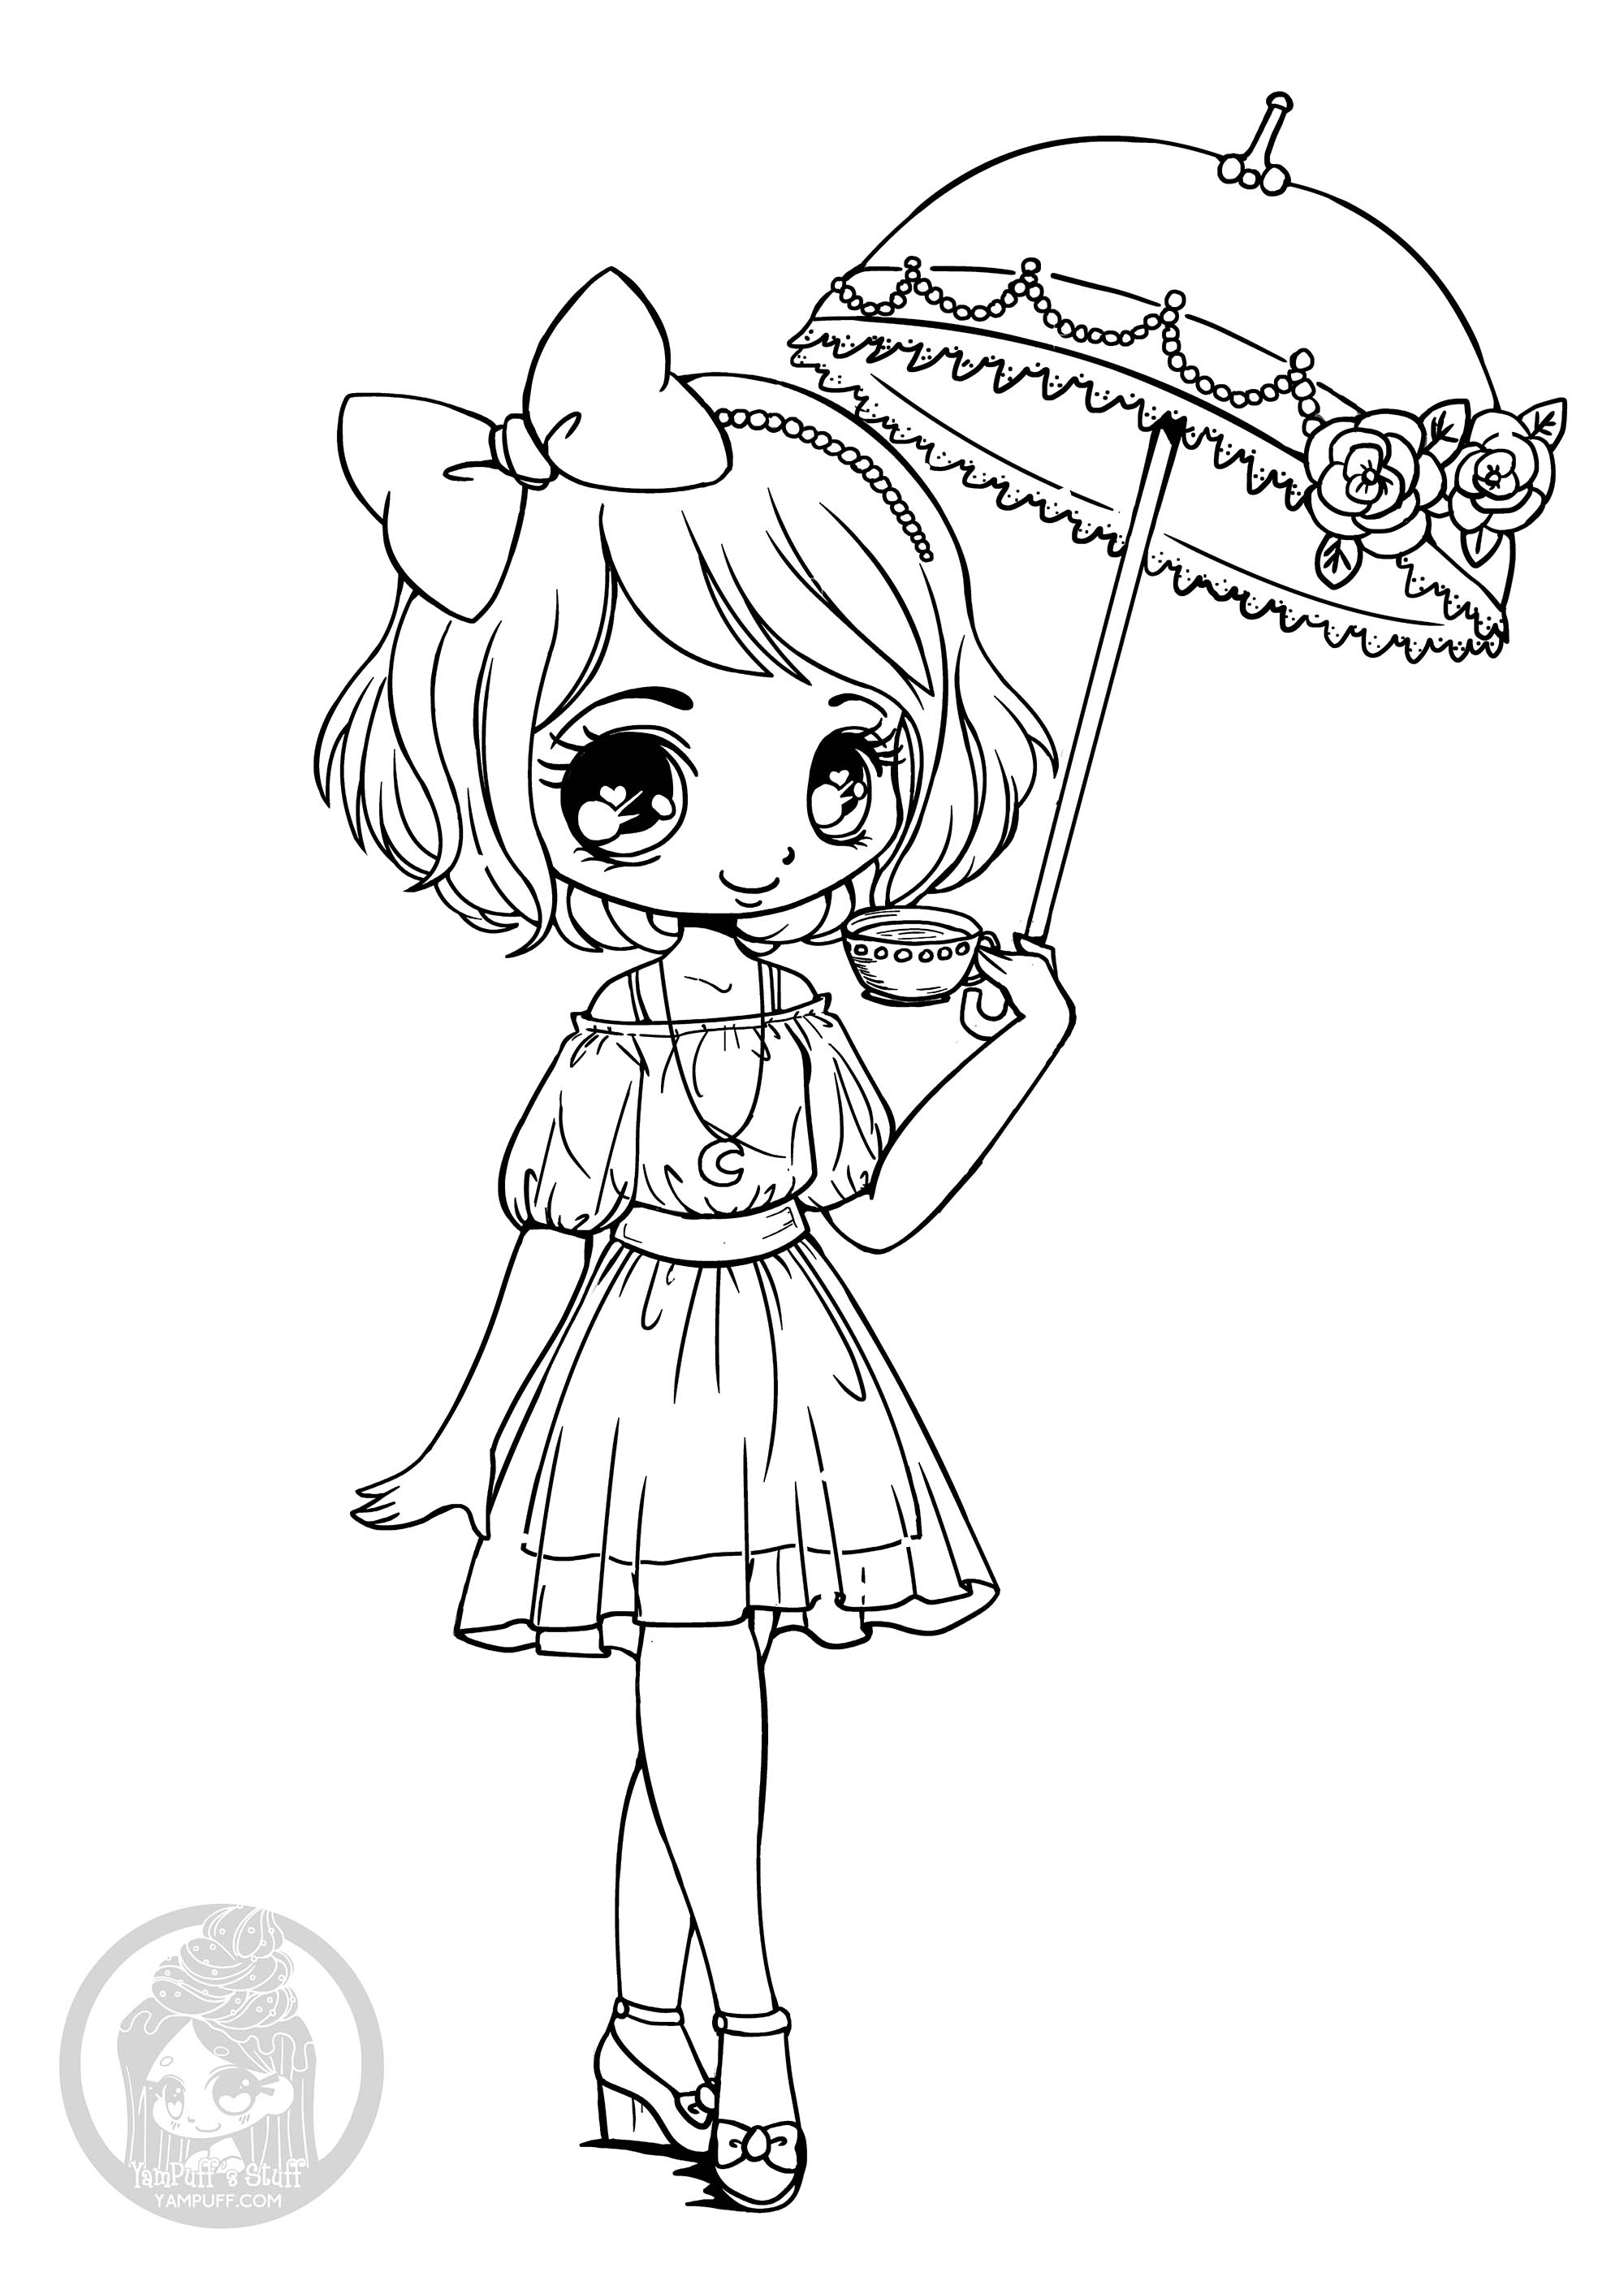 The girl with the umbrella - Kawaii Kids Coloring Pages